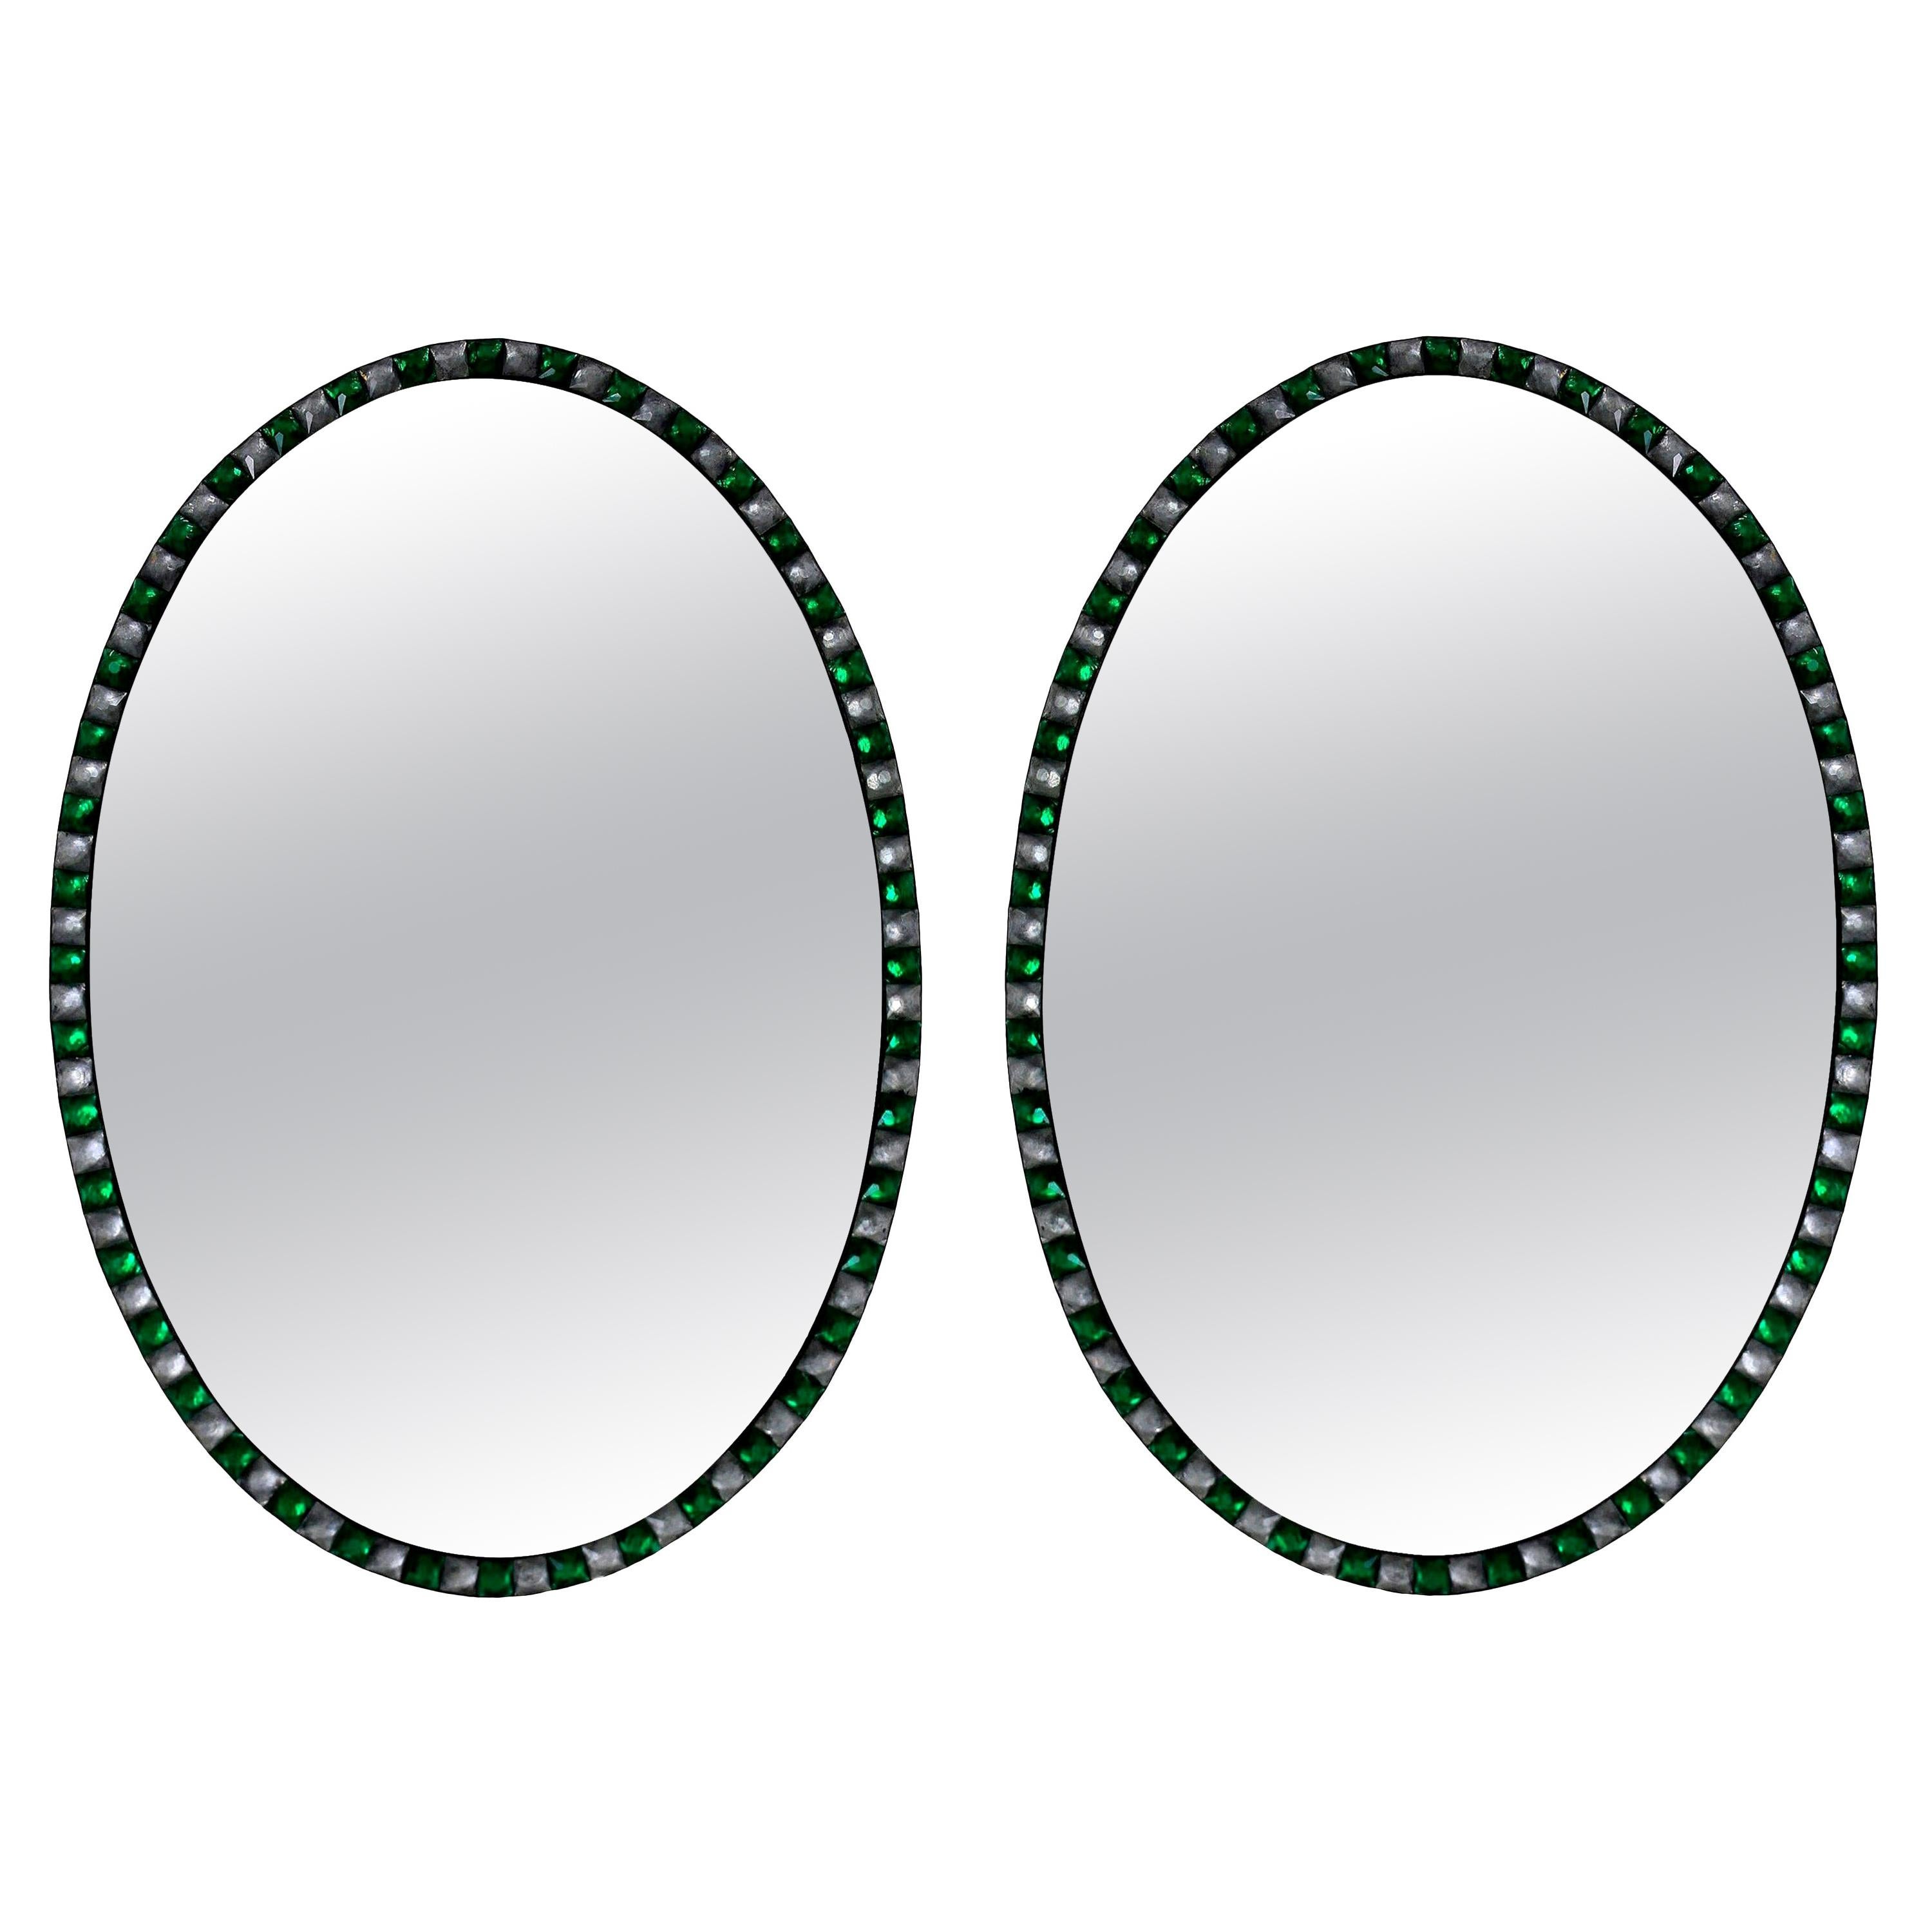 Georgian Style Irish Mirrors with Emerald Glass and Rock Crystal Faceted Border